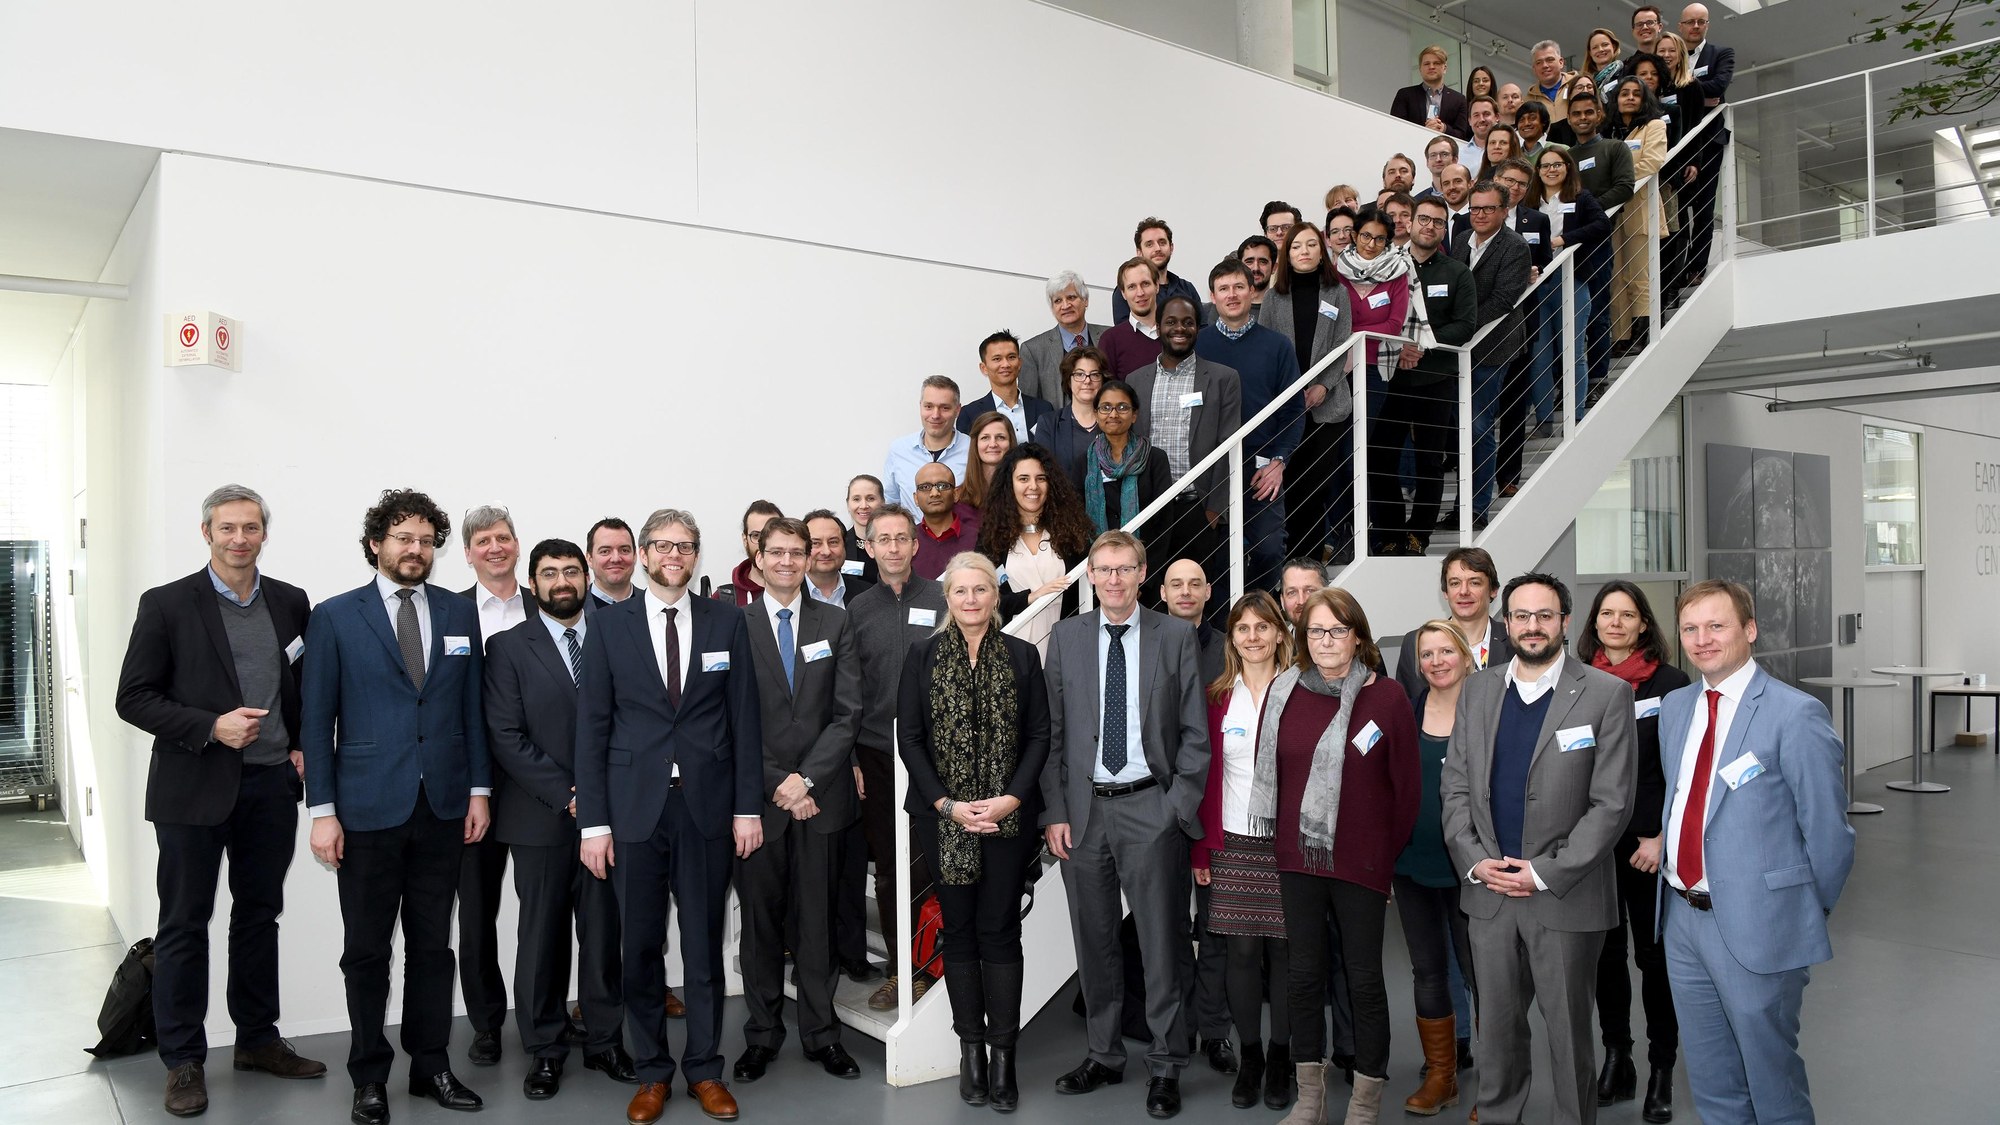 Group photo at the 'DLR Humanitarian Technology Days 2019'